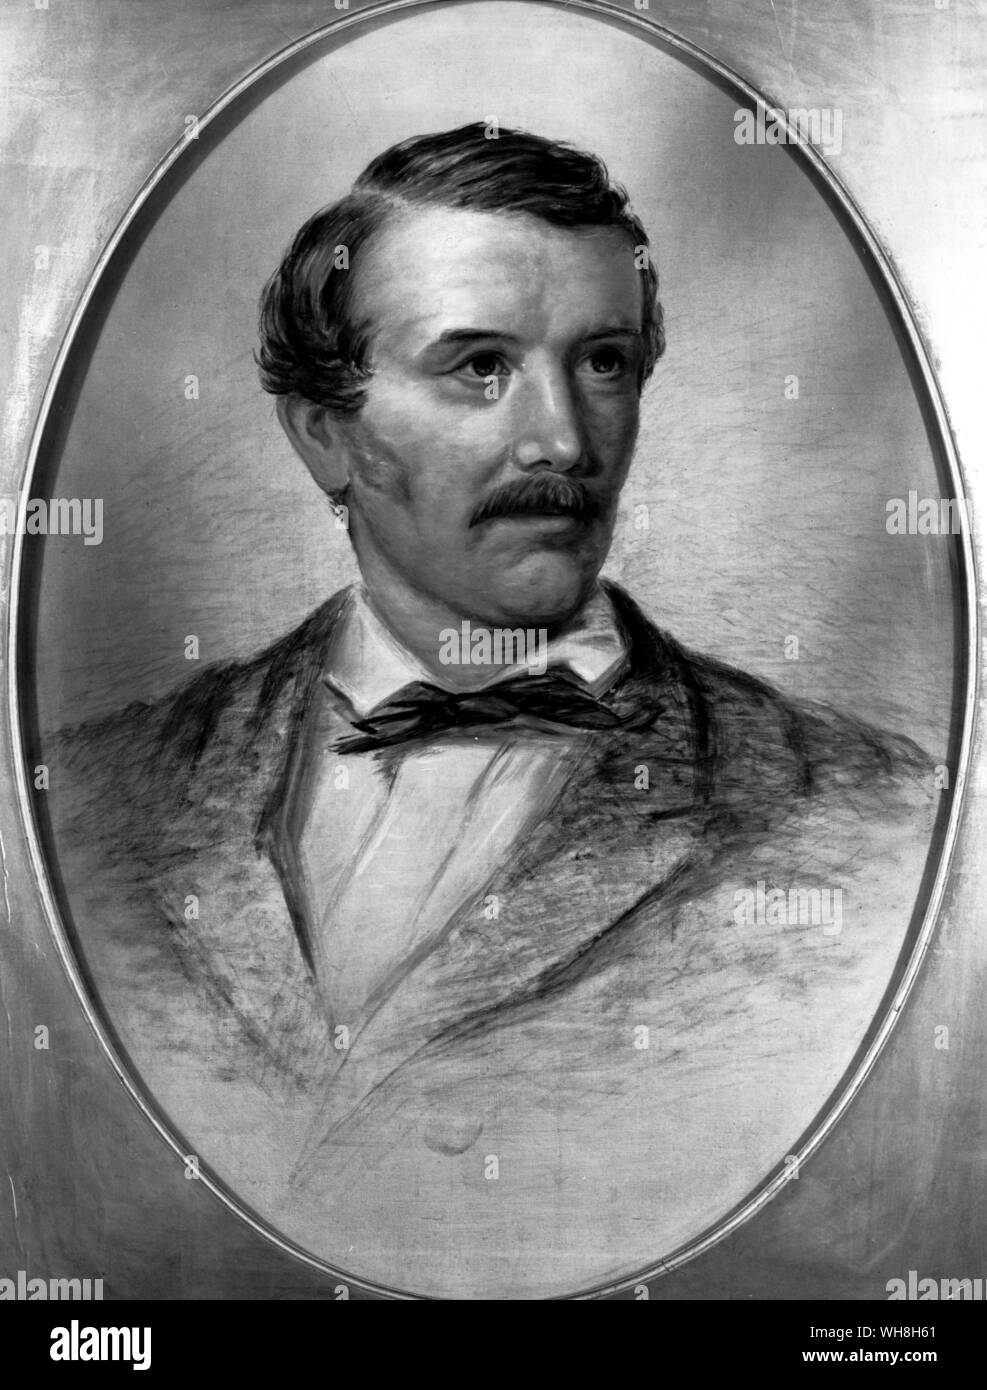 David Livingstone (1813-1873), Scottish missionary and famous African explorer. Portrait by General Charles Need. The African Adventure - A History of Africa's Explorers by Timothy Severin page 191. Stock Photo